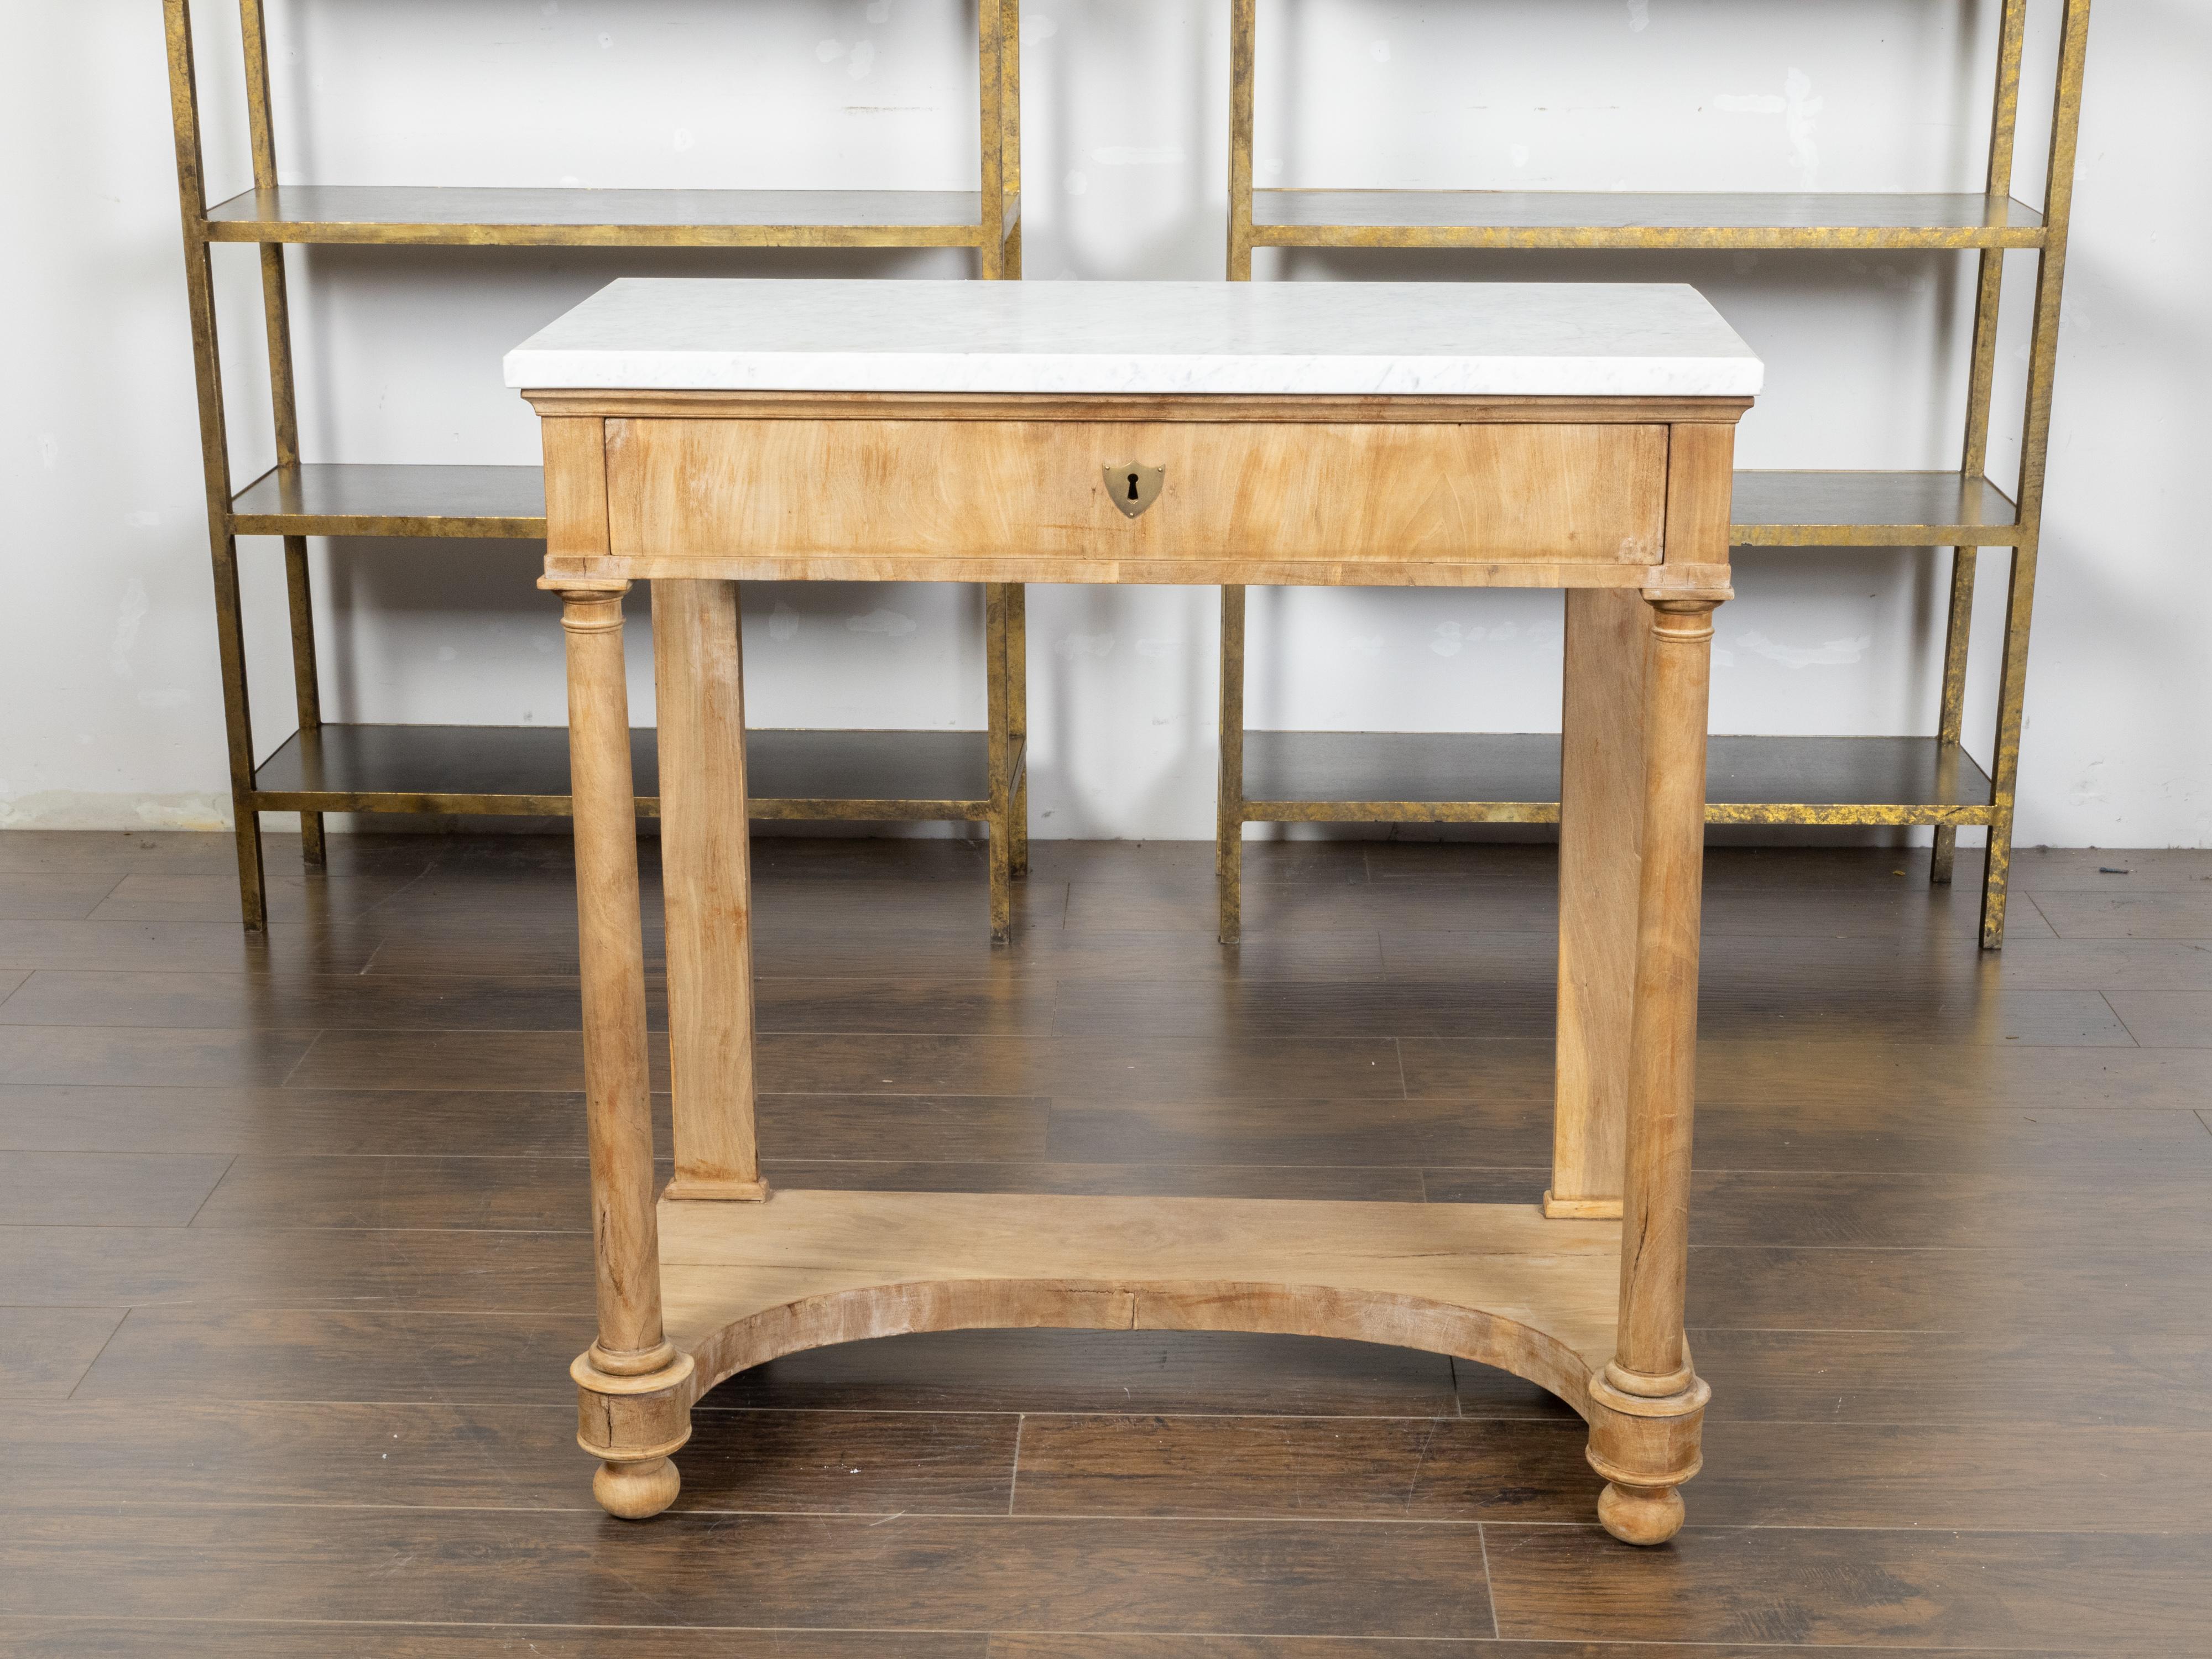 A French bleached walnut console table from the 19th century with white marble top, frieze drawer, in-curving shelf and Doric style column legs. Created in France during the 19th century, this bleached walnut console table features a rectangular